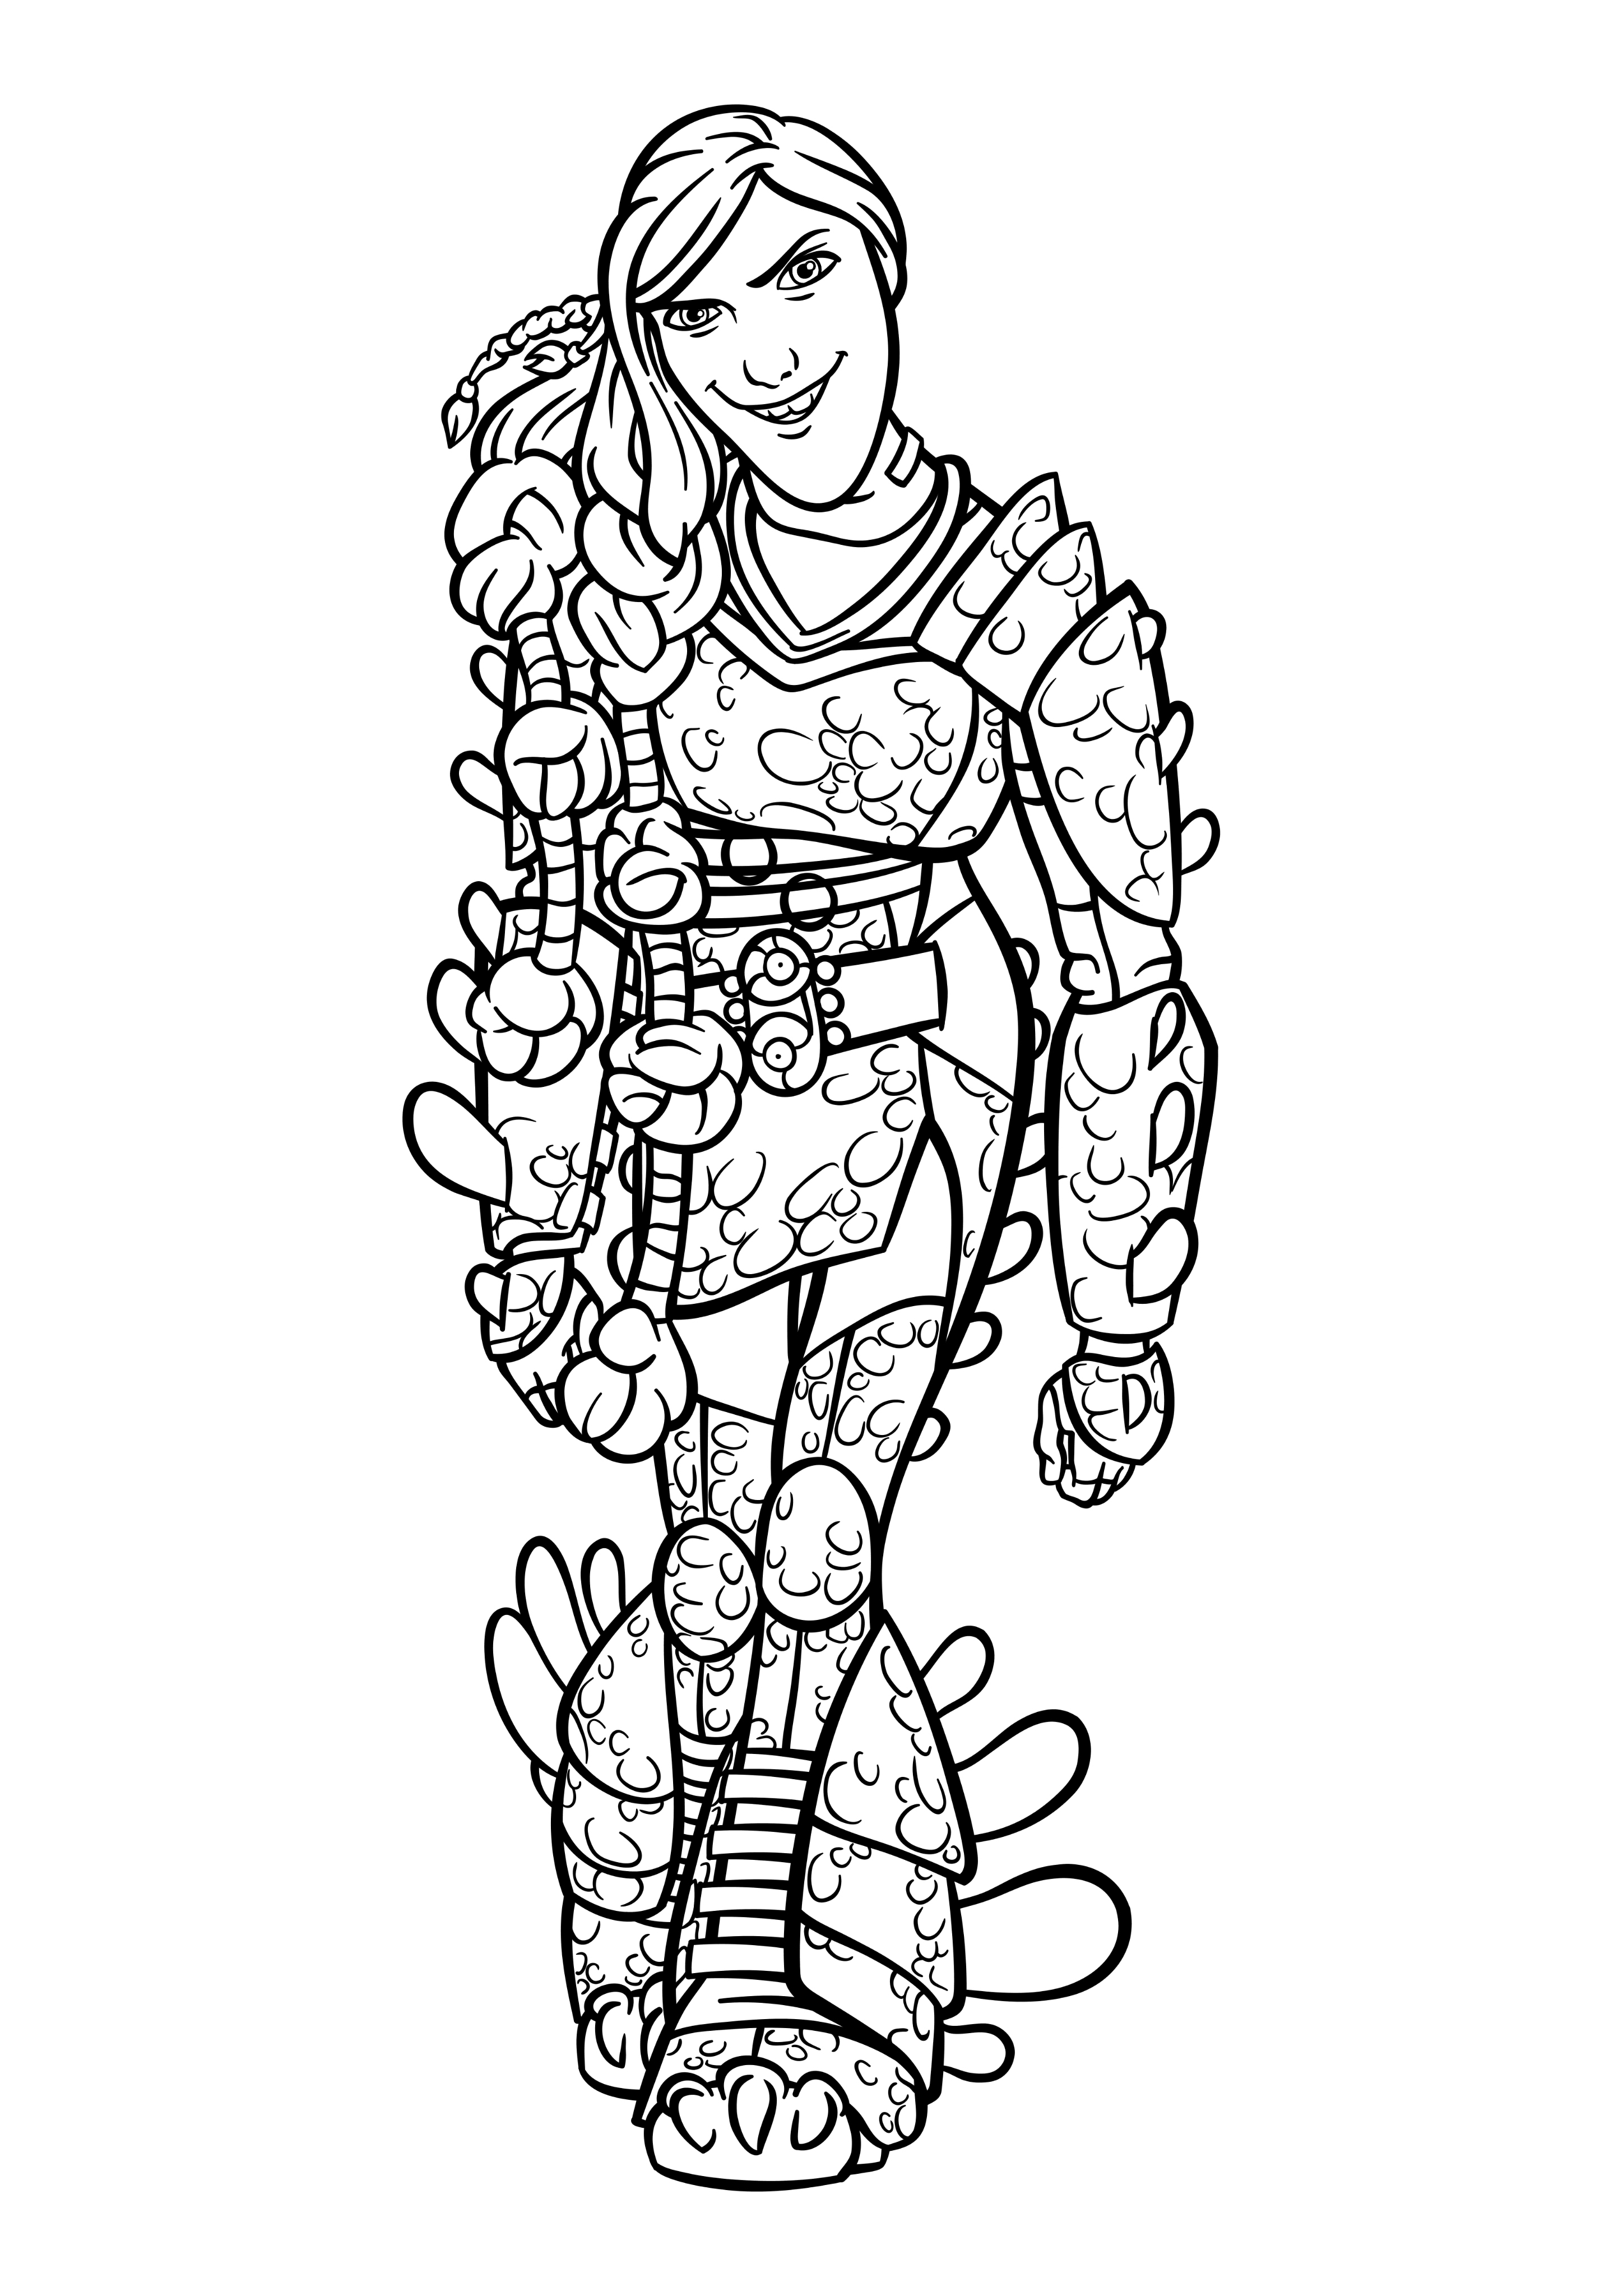 Coloring page How to Train Your Dragon 3 Ruffnut Thorston